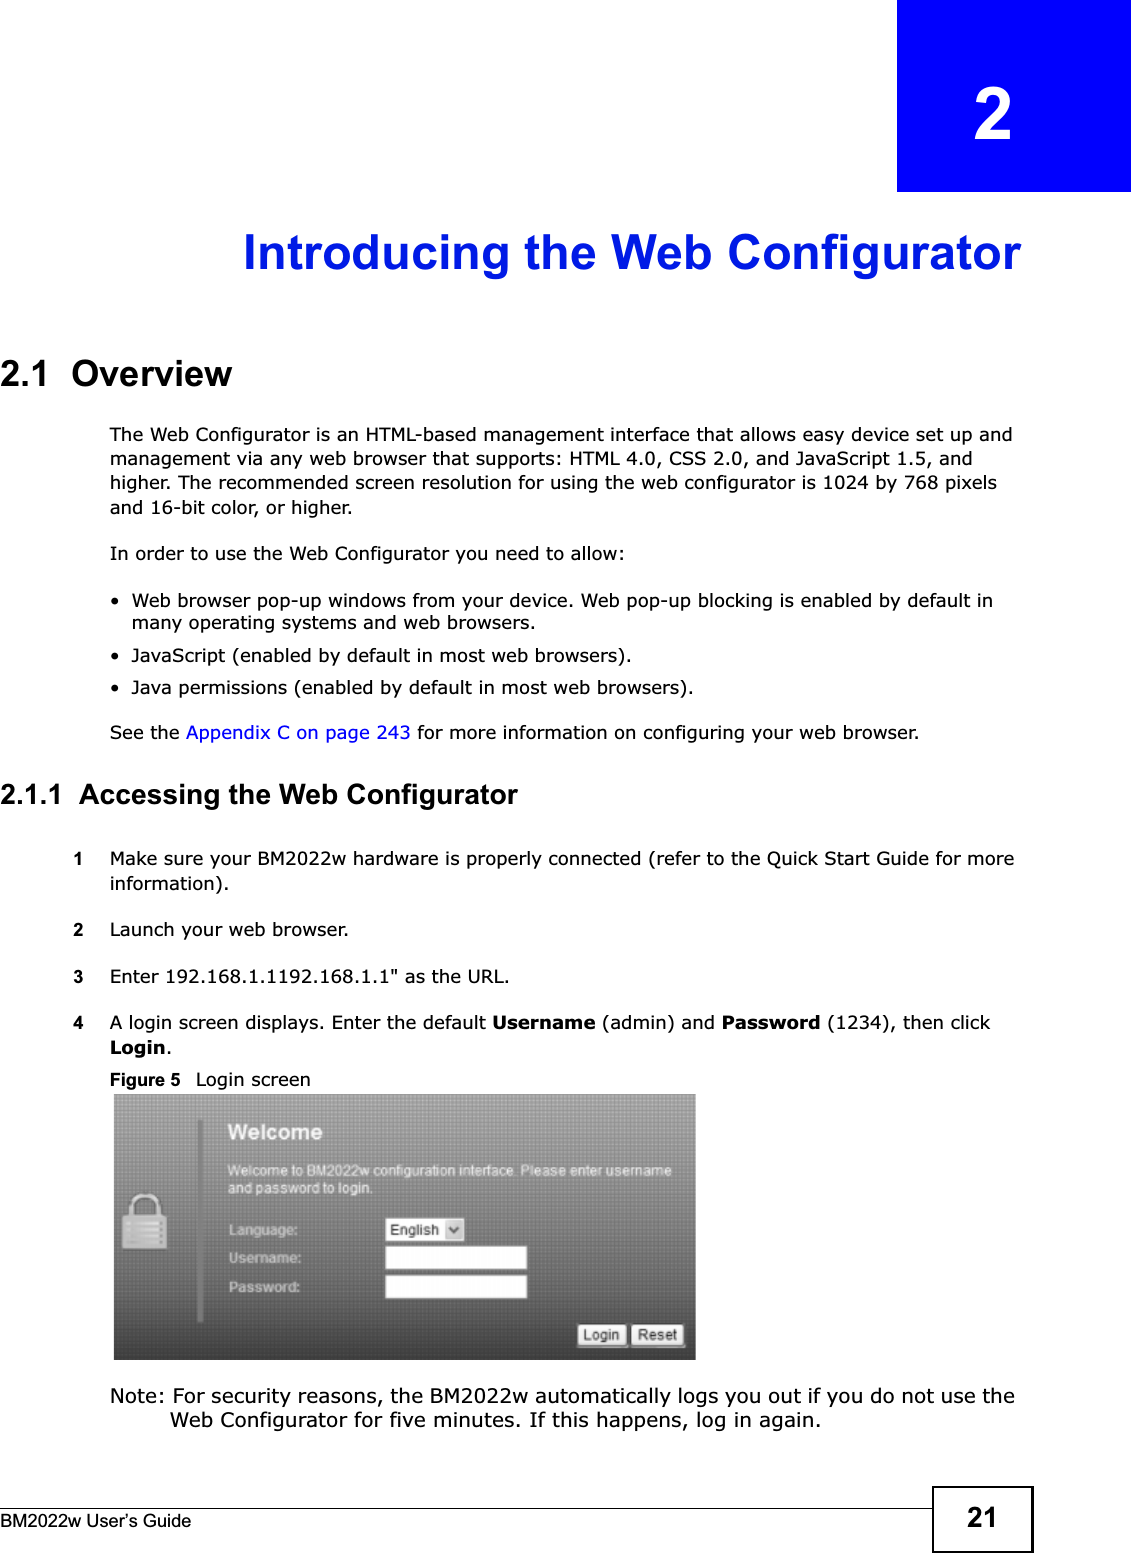 BM2022w User’s Guide 21CHAPTER   2Introducing the Web Configurator2.1  OverviewThe Web Configurator is an HTML-based management interface that allows easy device set up and management via any web browser that supports: HTML 4.0, CSS 2.0, and JavaScript 1.5, and higher. The recommended screen resolution for using the web configurator is 1024 by 768 pixels and 16-bit color, or higher.In order to use the Web Configurator you need to allow:• Web browser pop-up windows from your device. Web pop-up blocking is enabled by default in many operating systems and web browsers.• JavaScript (enabled by default in most web browsers).• Java permissions (enabled by default in most web browsers).See the Appendix C on page 243 for more information on configuring your web browser.2.1.1  Accessing the Web Configurator1Make sure your BM2022w hardware is properly connected (refer to the Quick Start Guide for more information).2Launch your web browser.3Enter 192.168.1.1192.168.1.1&quot; as the URL.4A login screen displays. Enter the default Username (admin) and Password (1234), then click Login.Figure 5   Login screenNote: For security reasons, the BM2022w automatically logs you out if you do not use the Web Configurator for five minutes. If this happens, log in again.